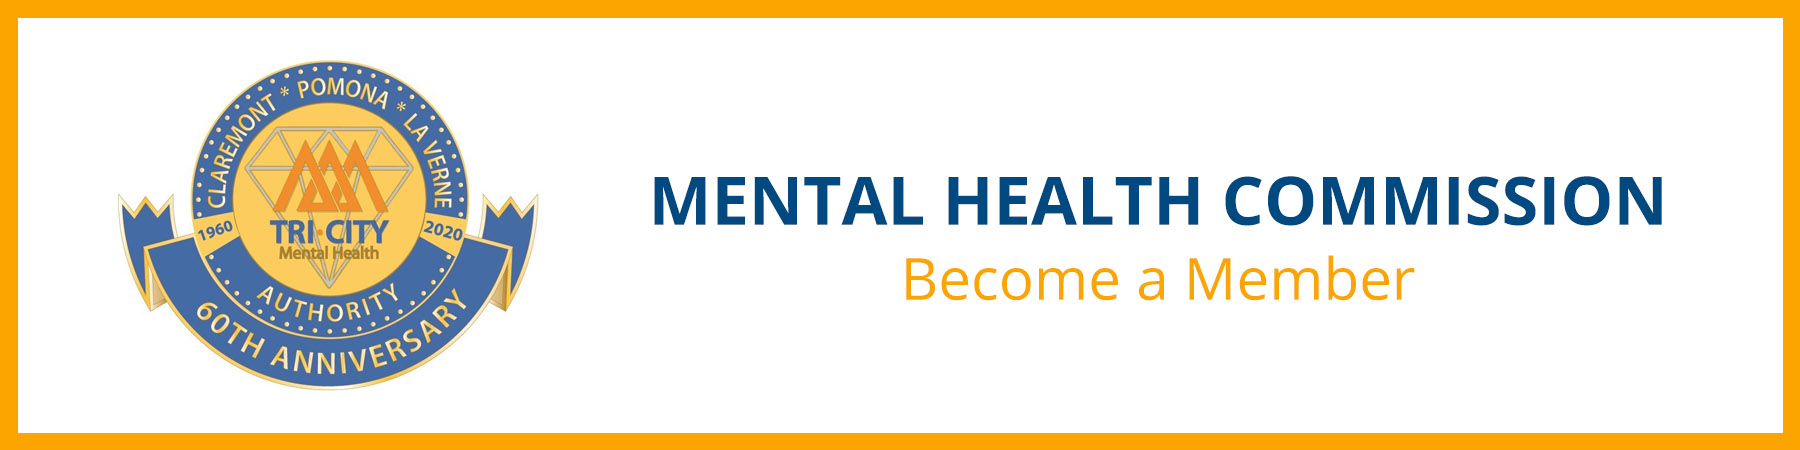 Become a member of the Mental Health Commission